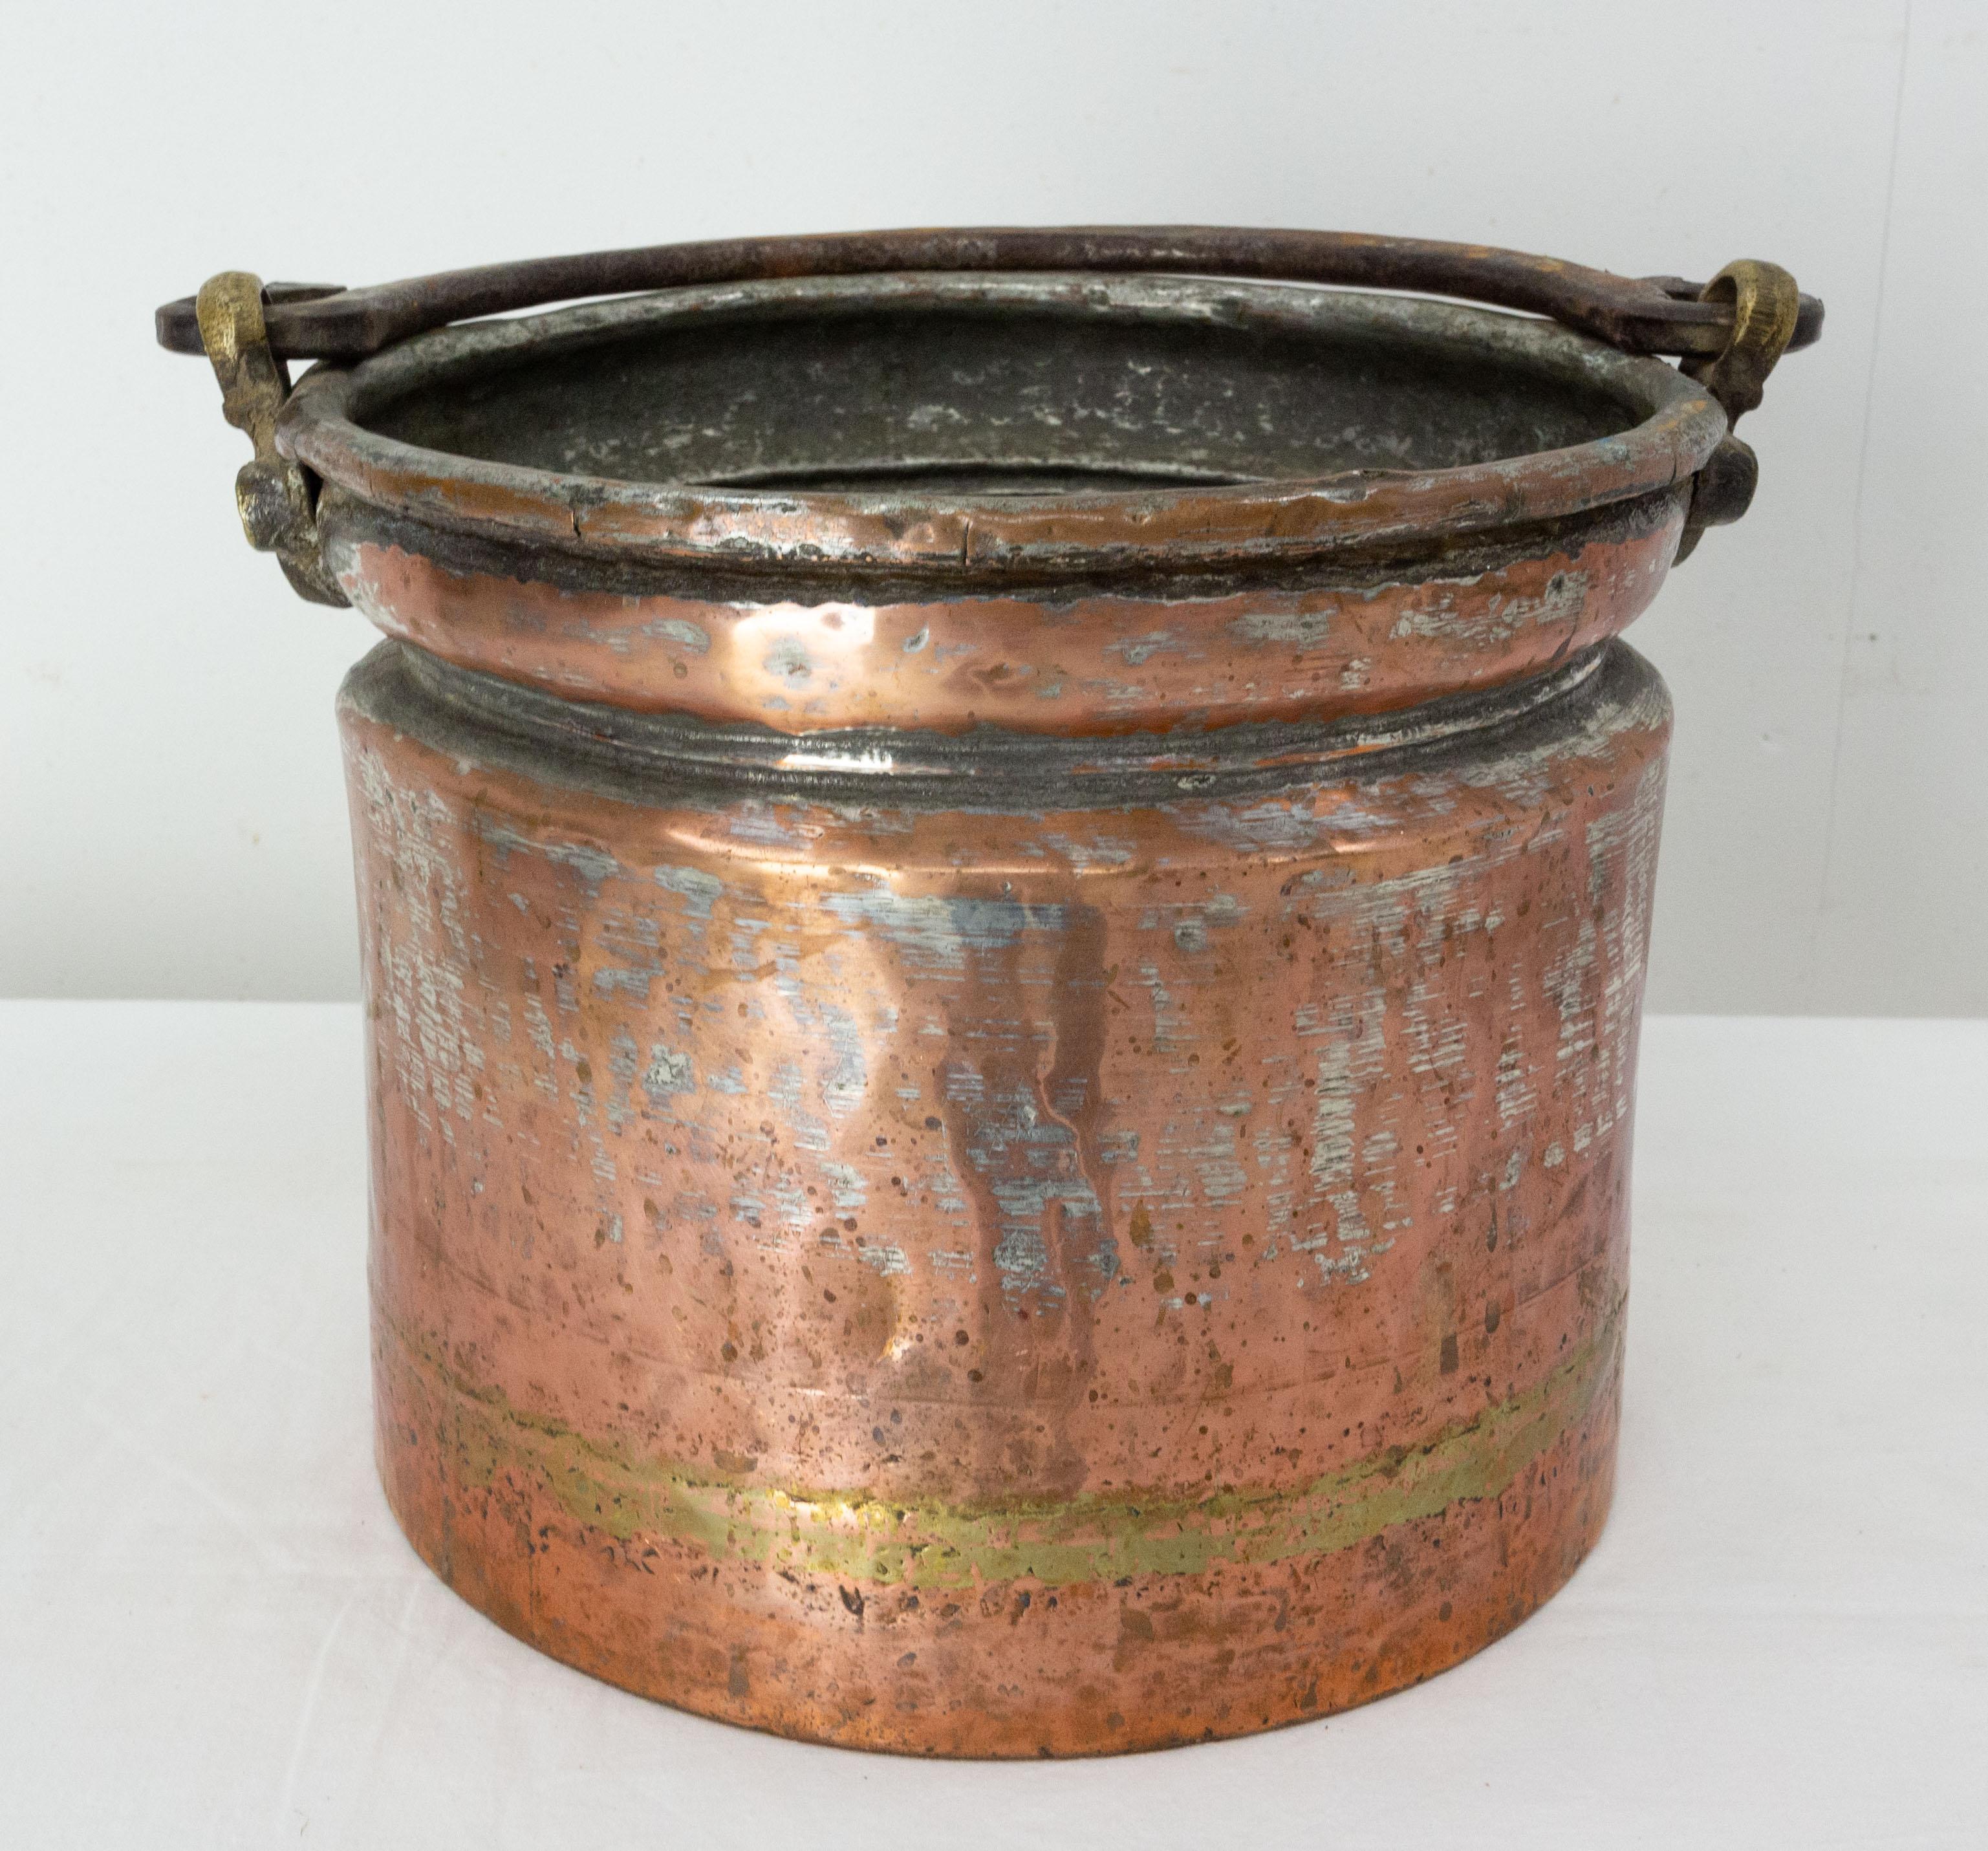 Antique French bucket can be used as a planter or jardinière.
Copper
Interior dimensions: diameter 8.46 in. (21.5 cm), height: 8.07 in. (20.5 cm)
Good condition.

If you like it, please see also 19th Century Planter Copper Jardinière with Two